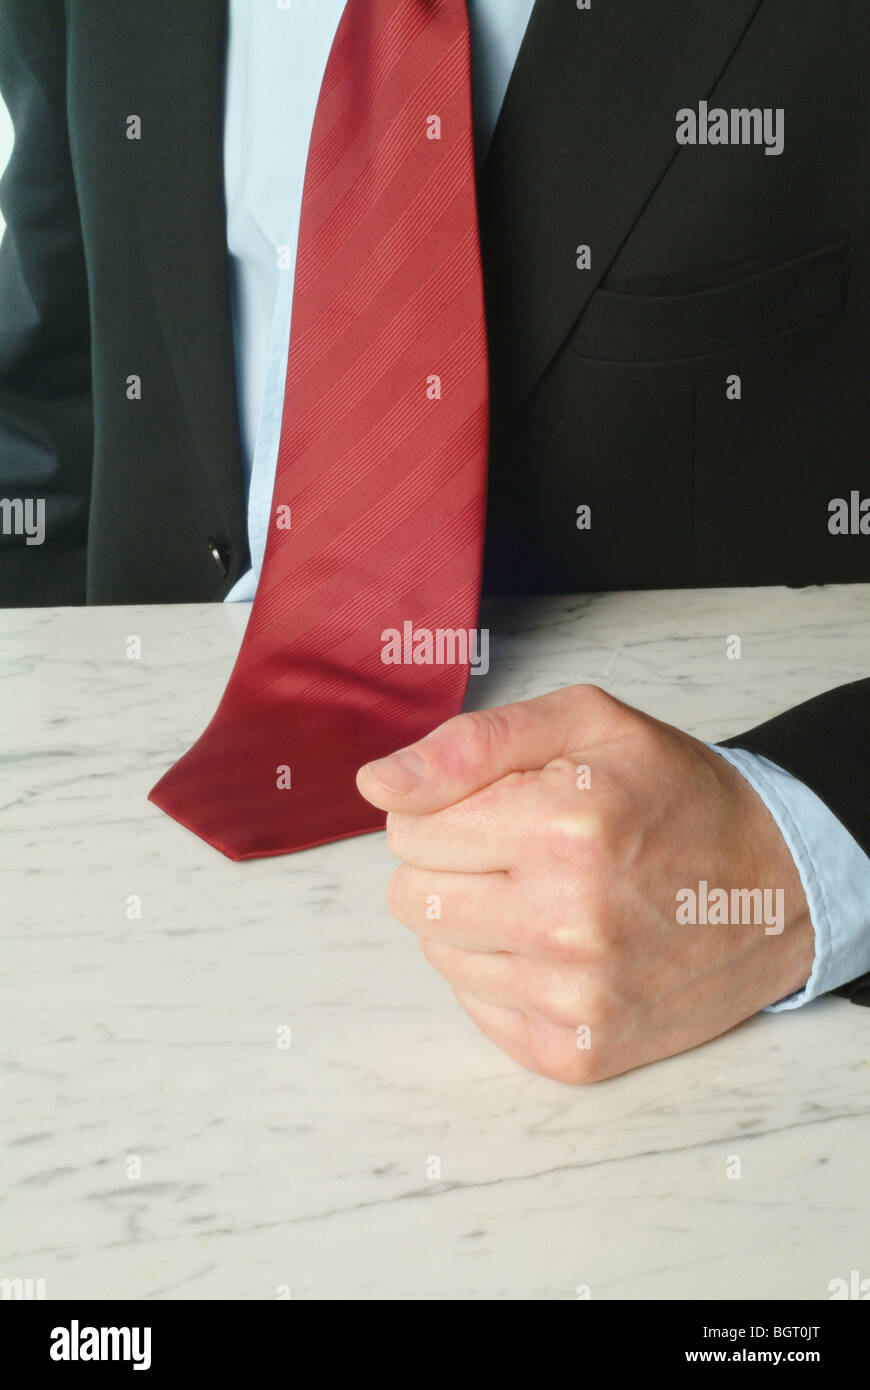 Man banging his fist on a table Stock Photo